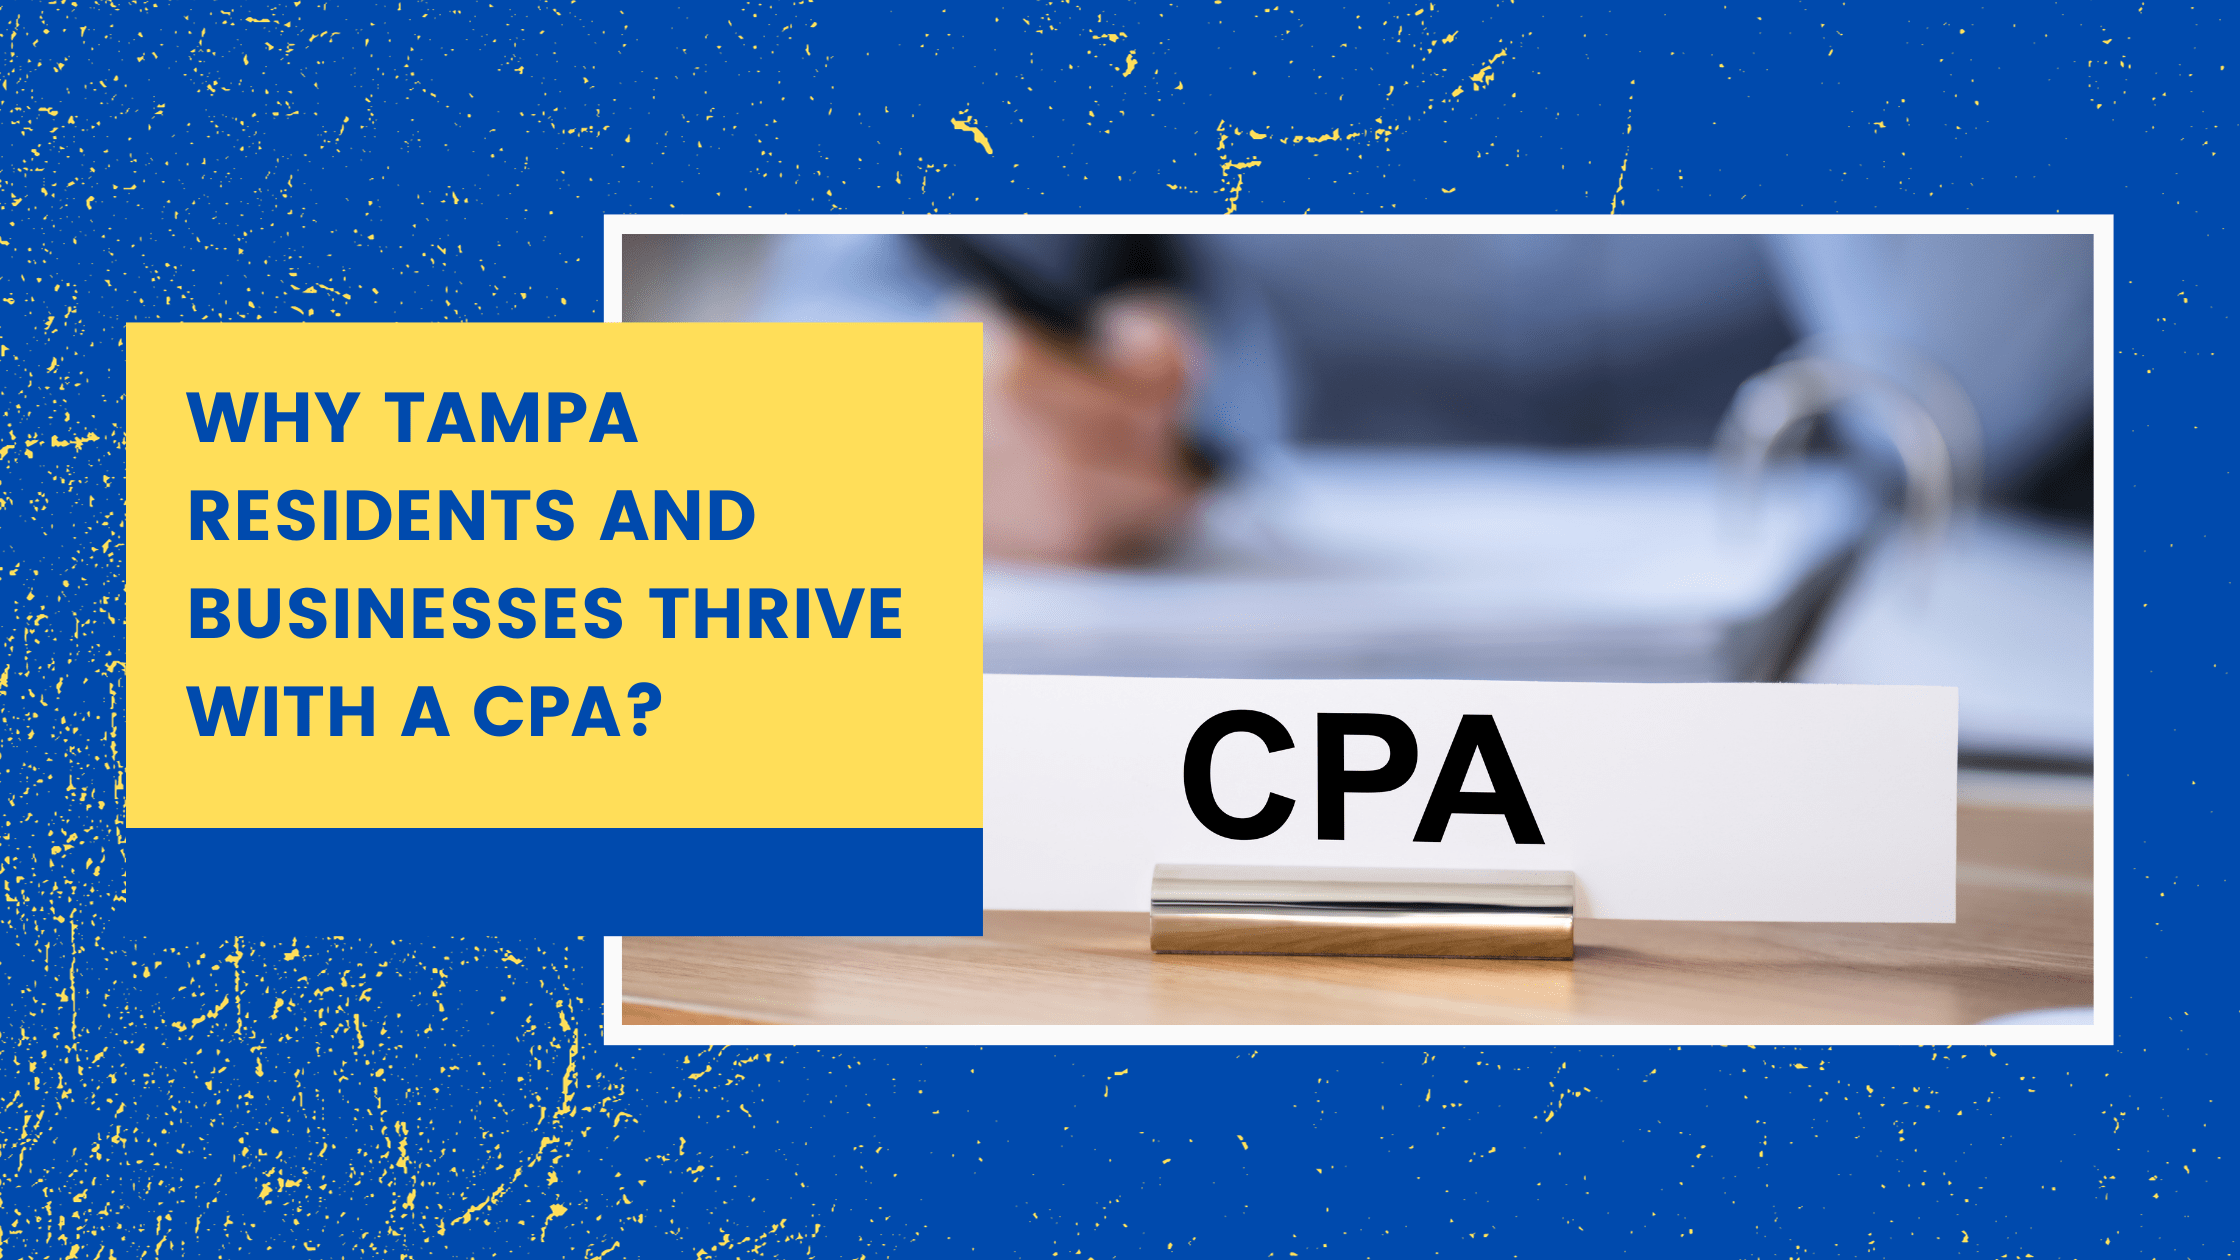 Why Tampa Residents and Businesses Thrive with a CPA